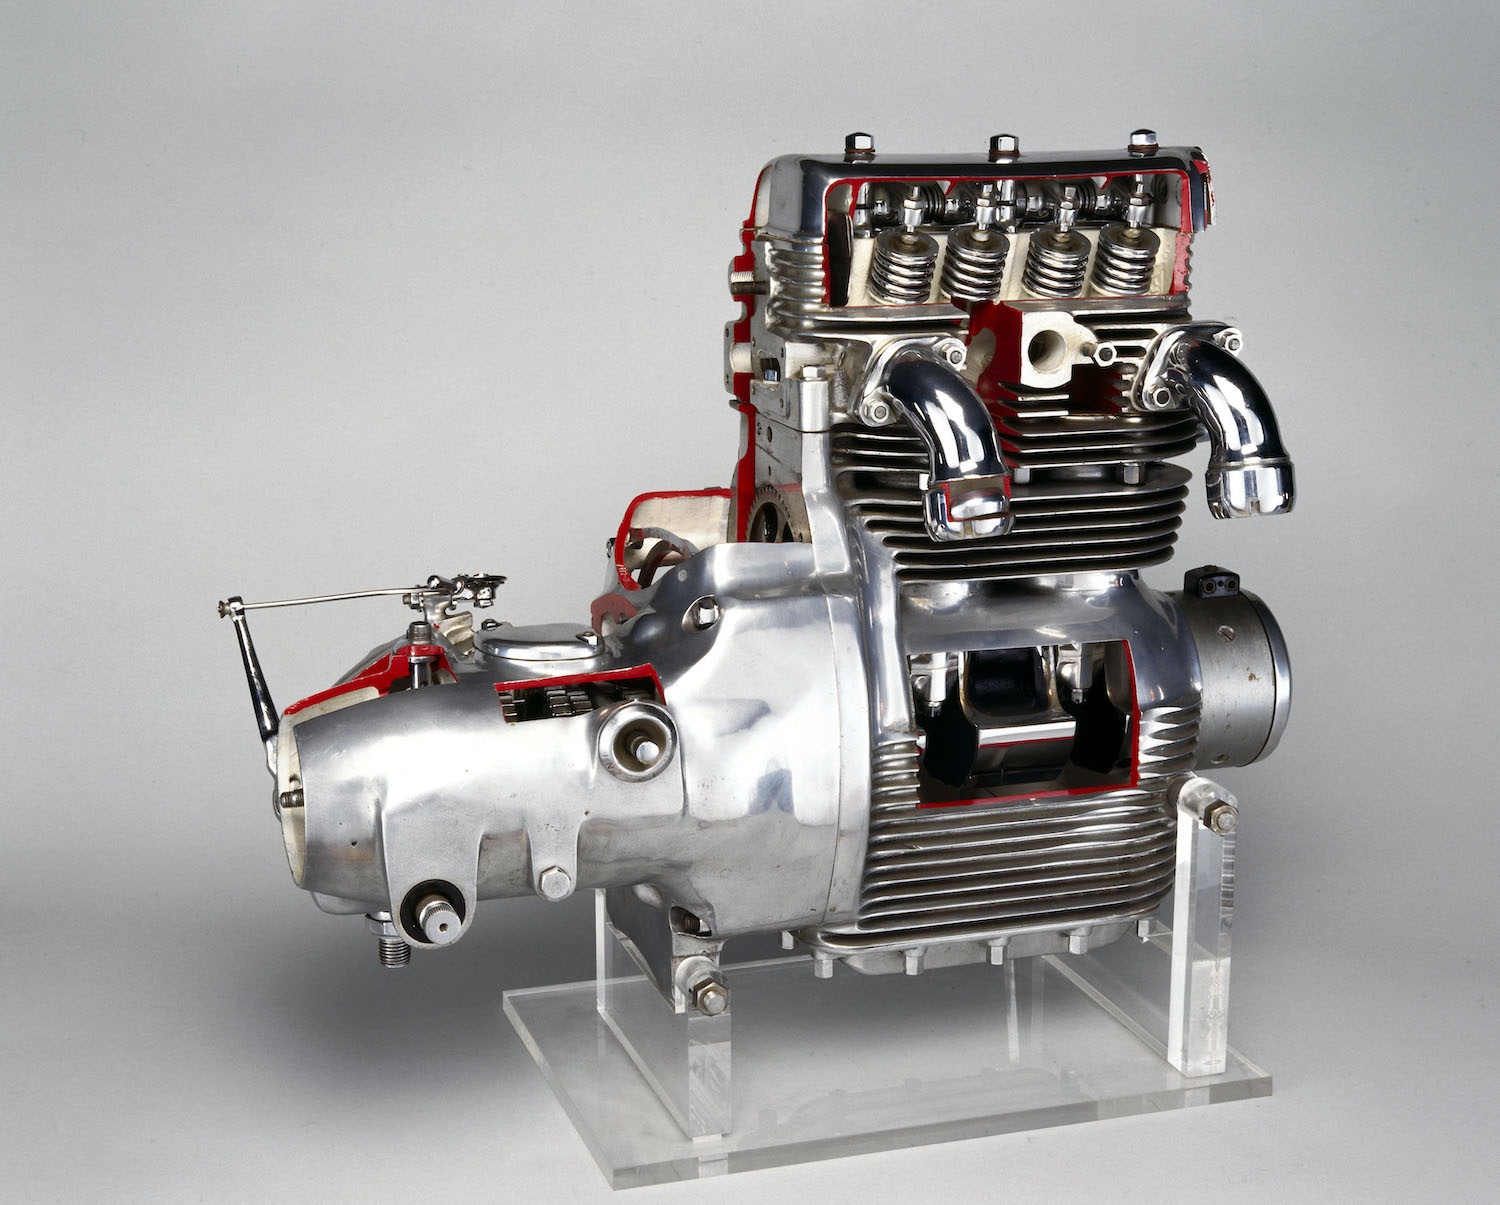 Cutaway engine with its camshafts and valves visible.